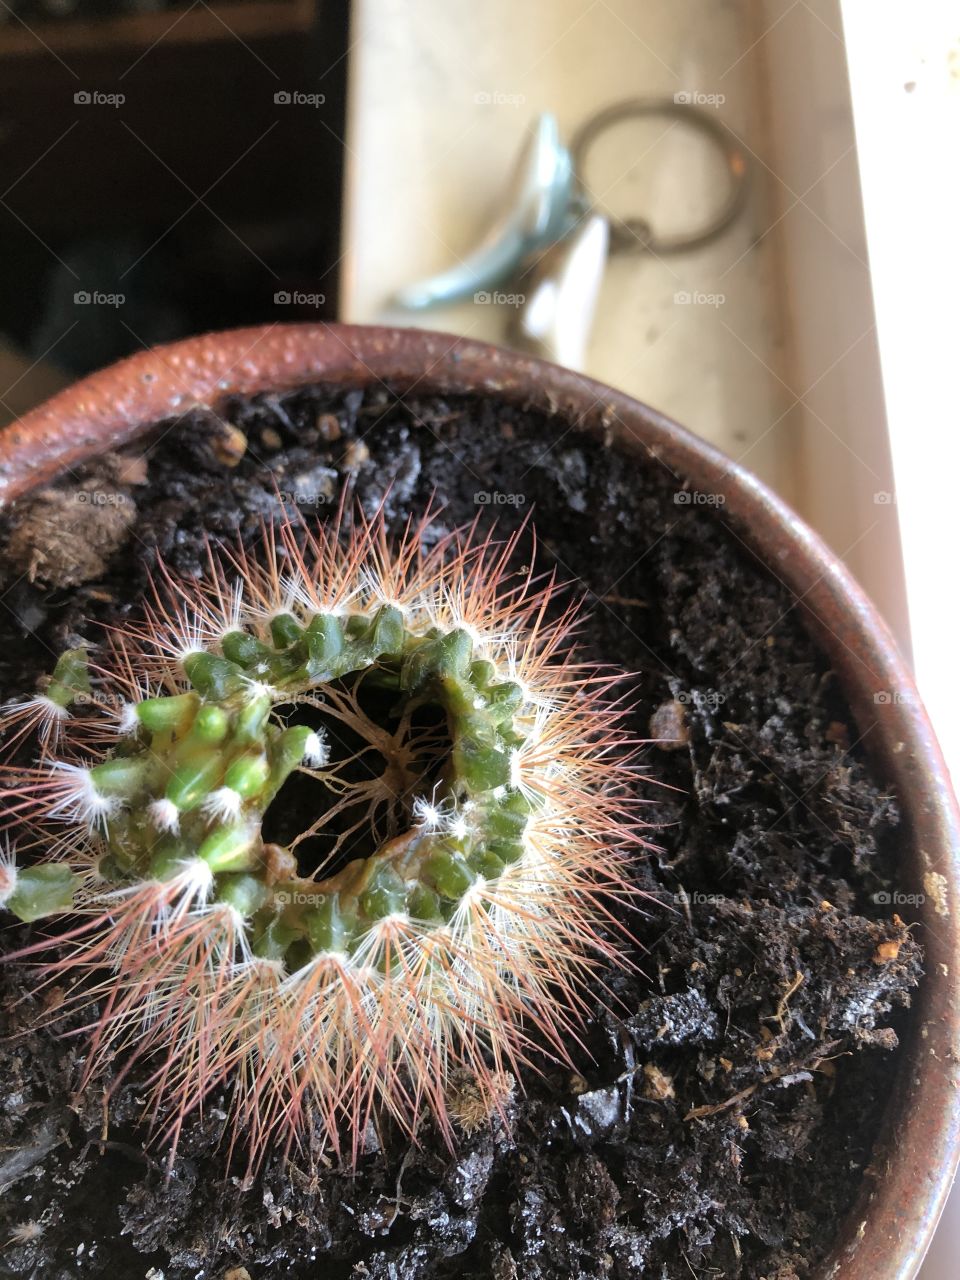 What’s inside your cactus?